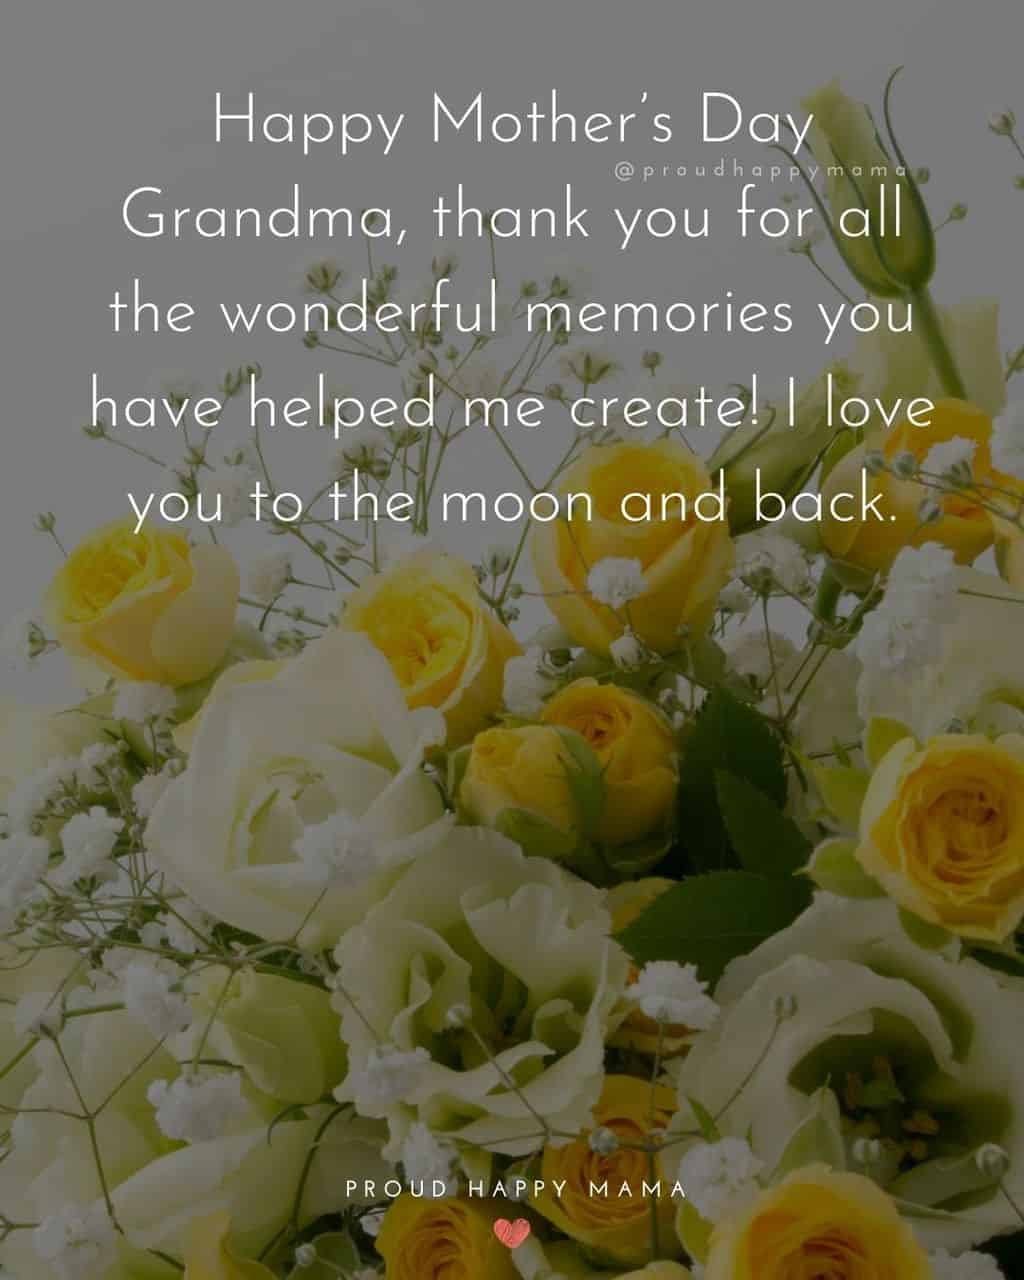 Happy Mothers Day Quotes To Grandma - Happy Mother’s Day Grandma, thank you for all the wonderful memories you have